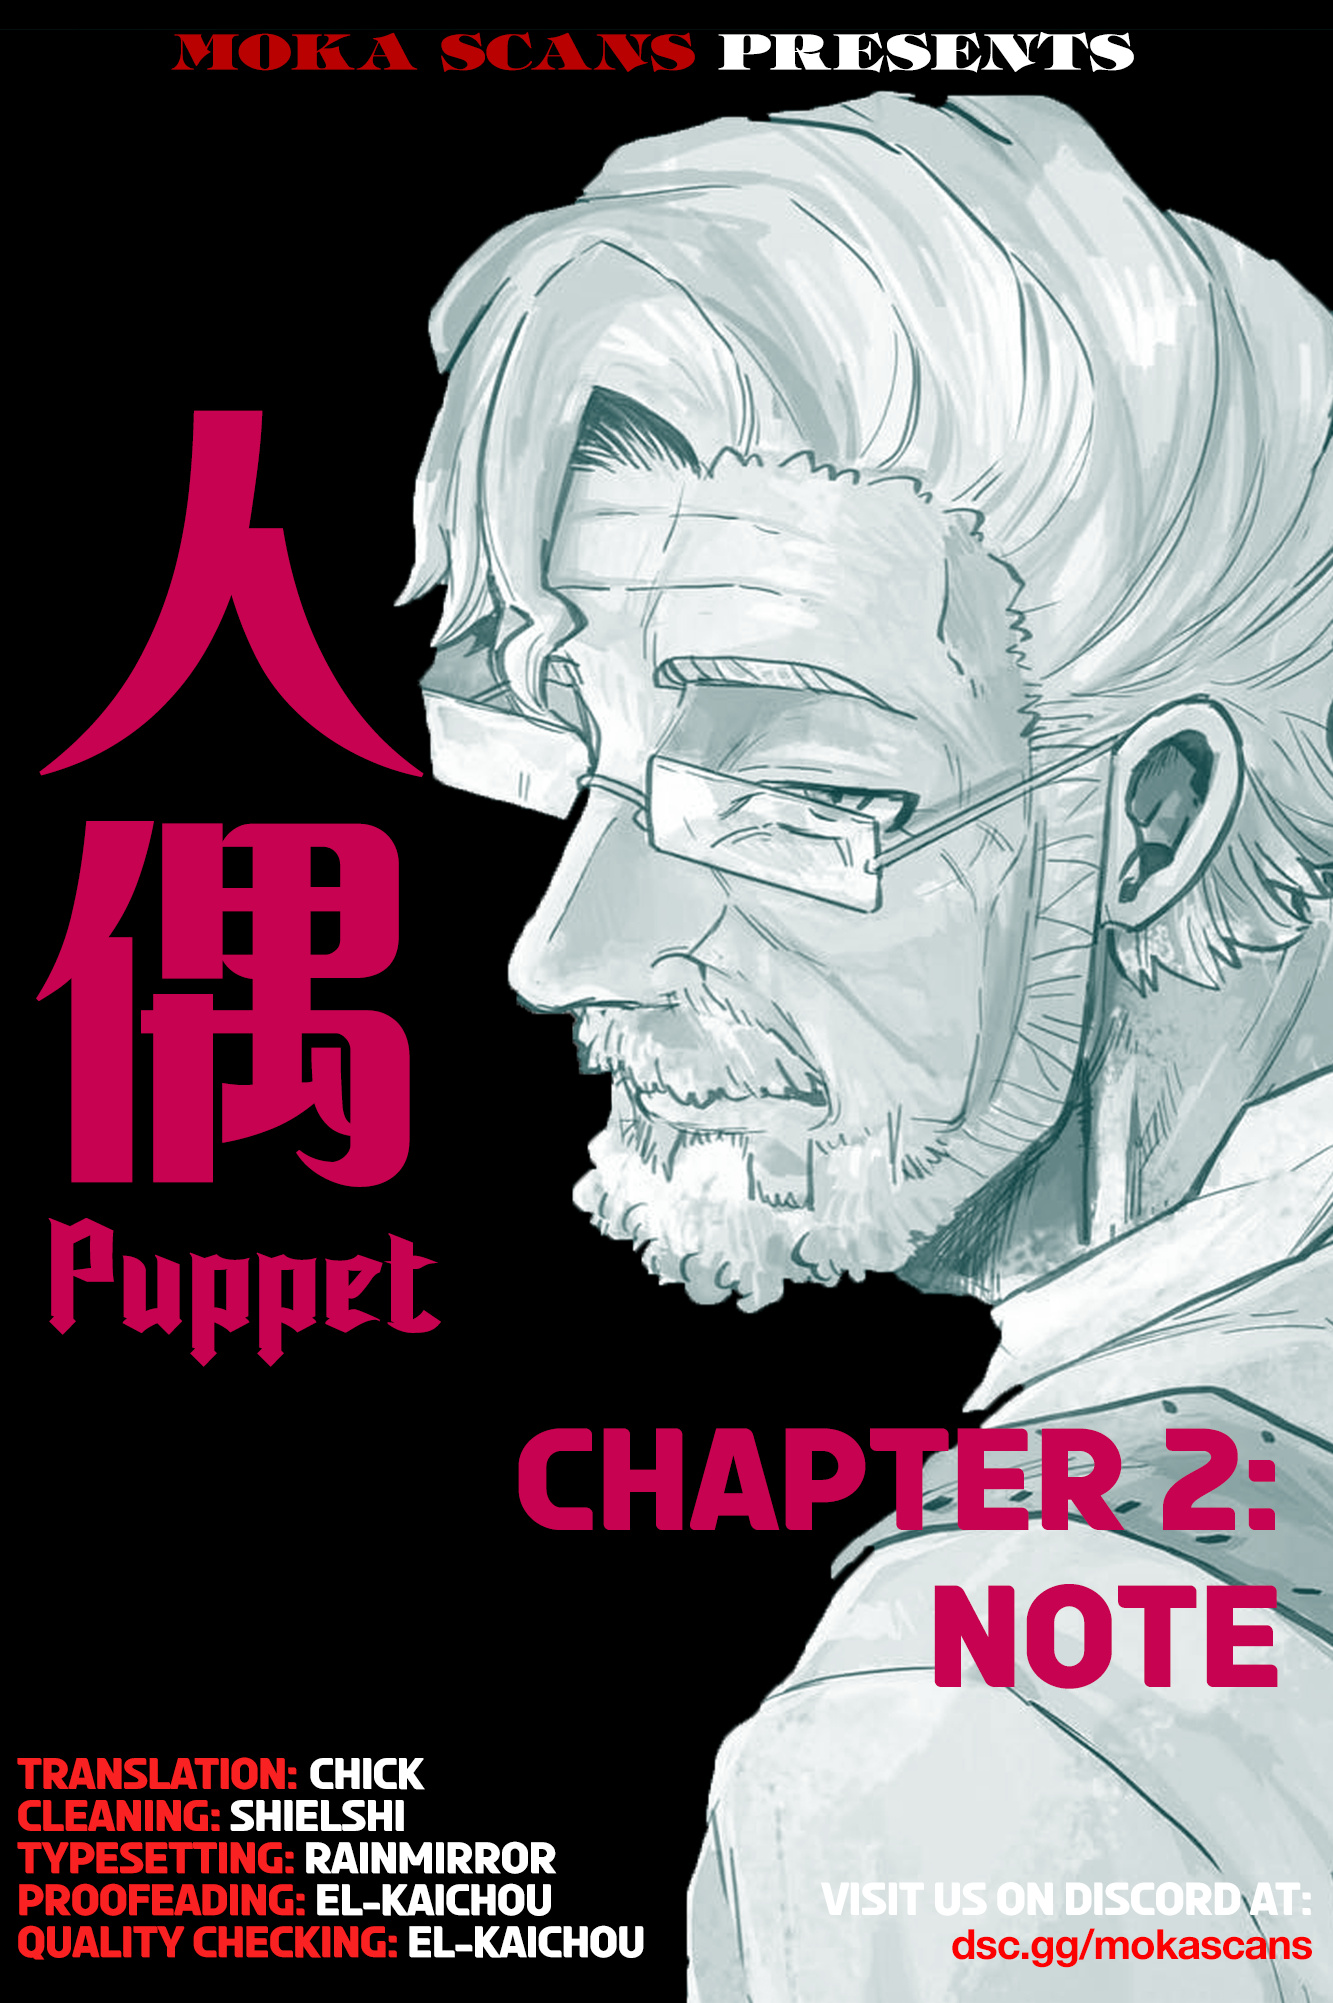 Puppet Chapter 2 #1